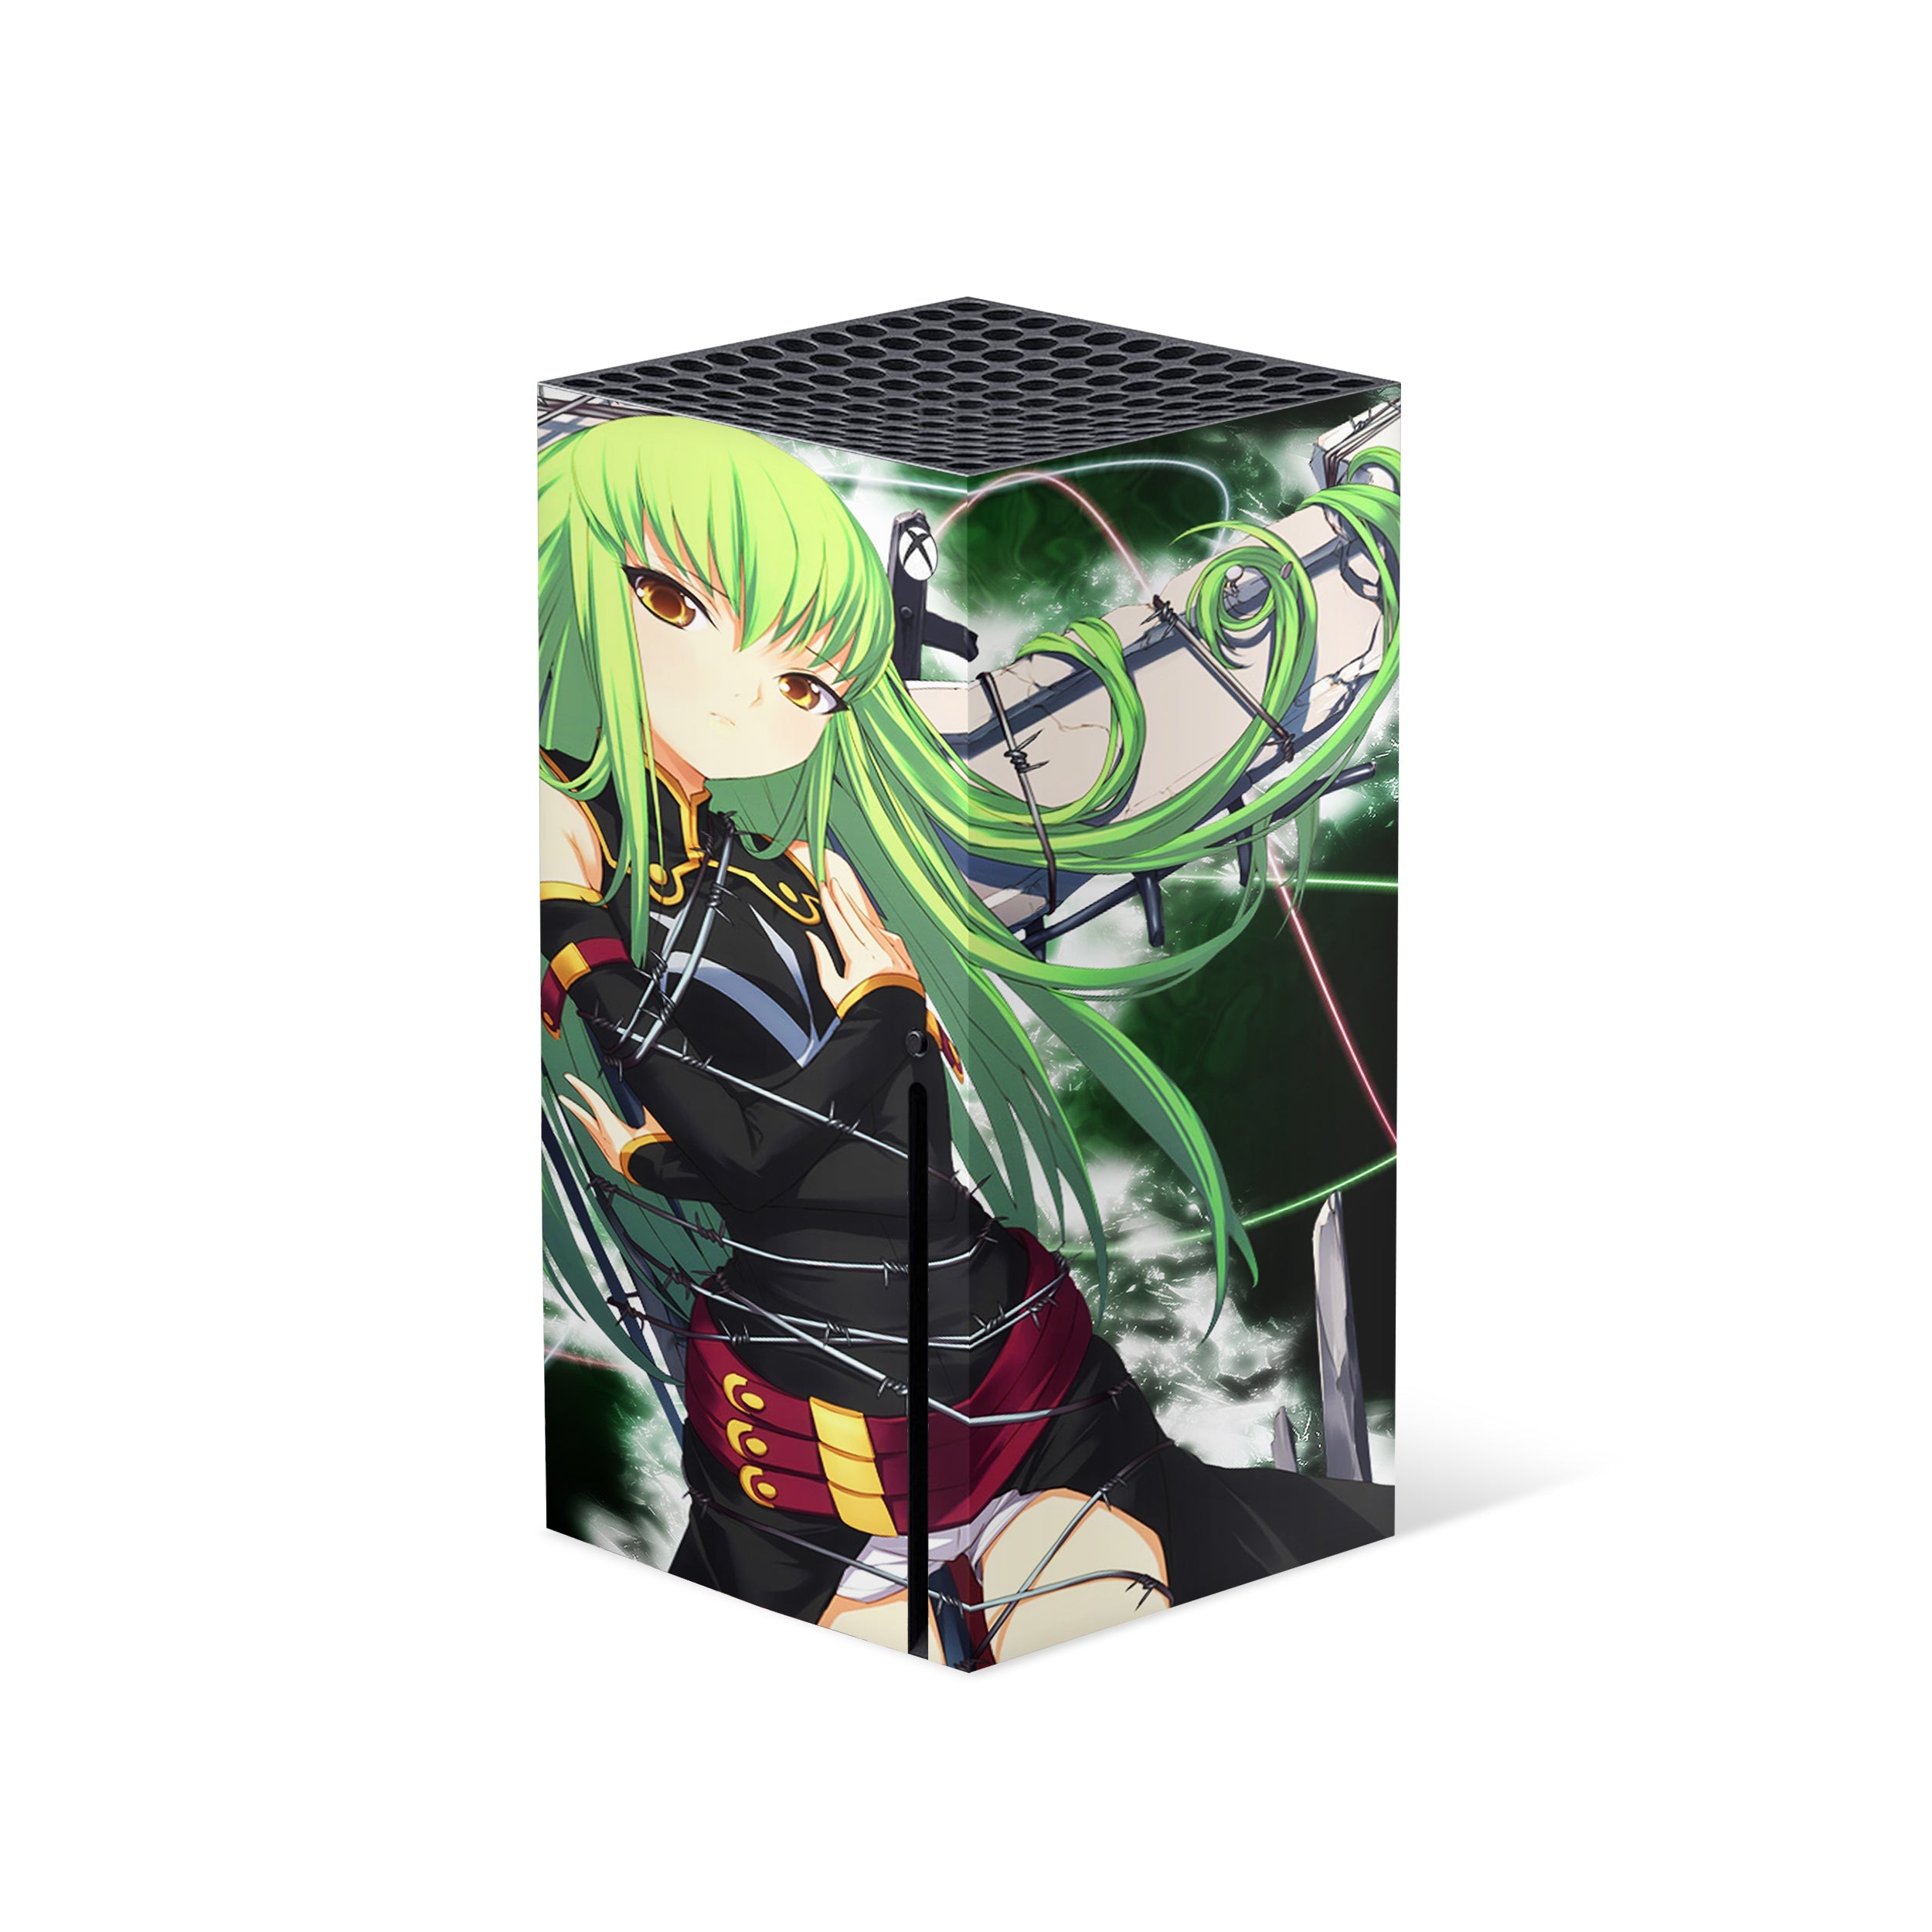 A video game skin featuring a Code Geass CC design for the Xbox Series X.